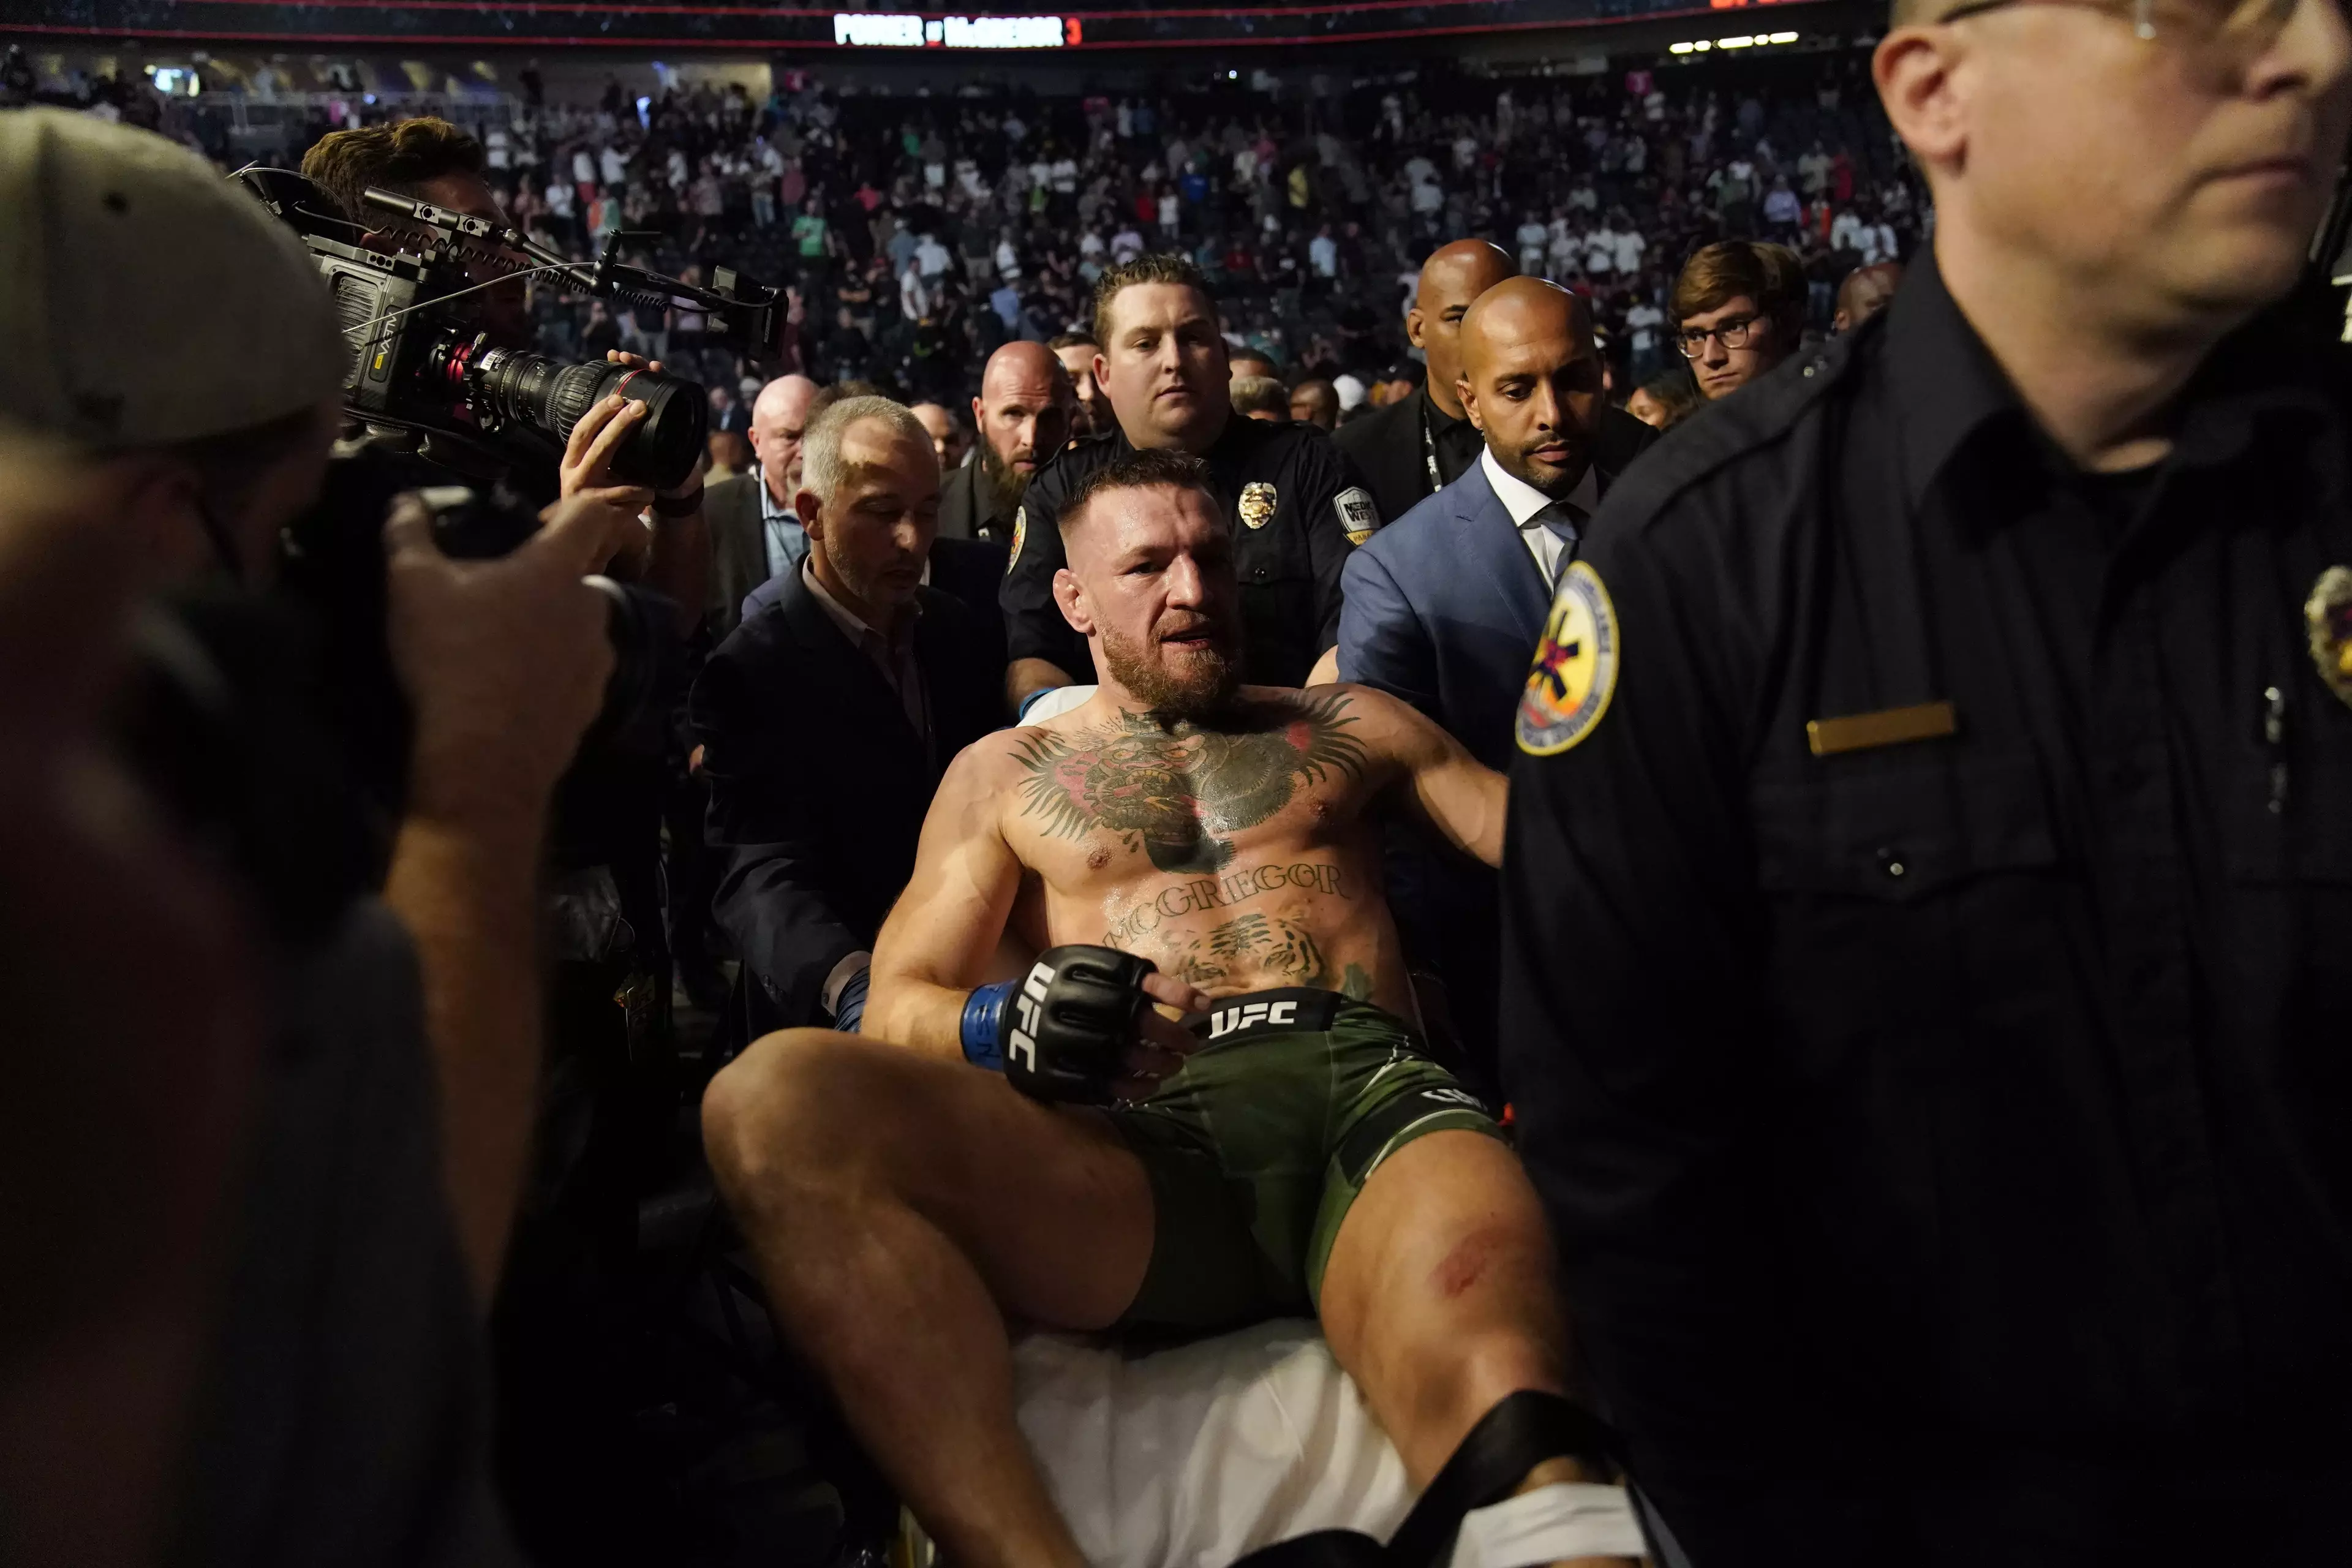 McGregor threatened Poirier - before and after the fight.